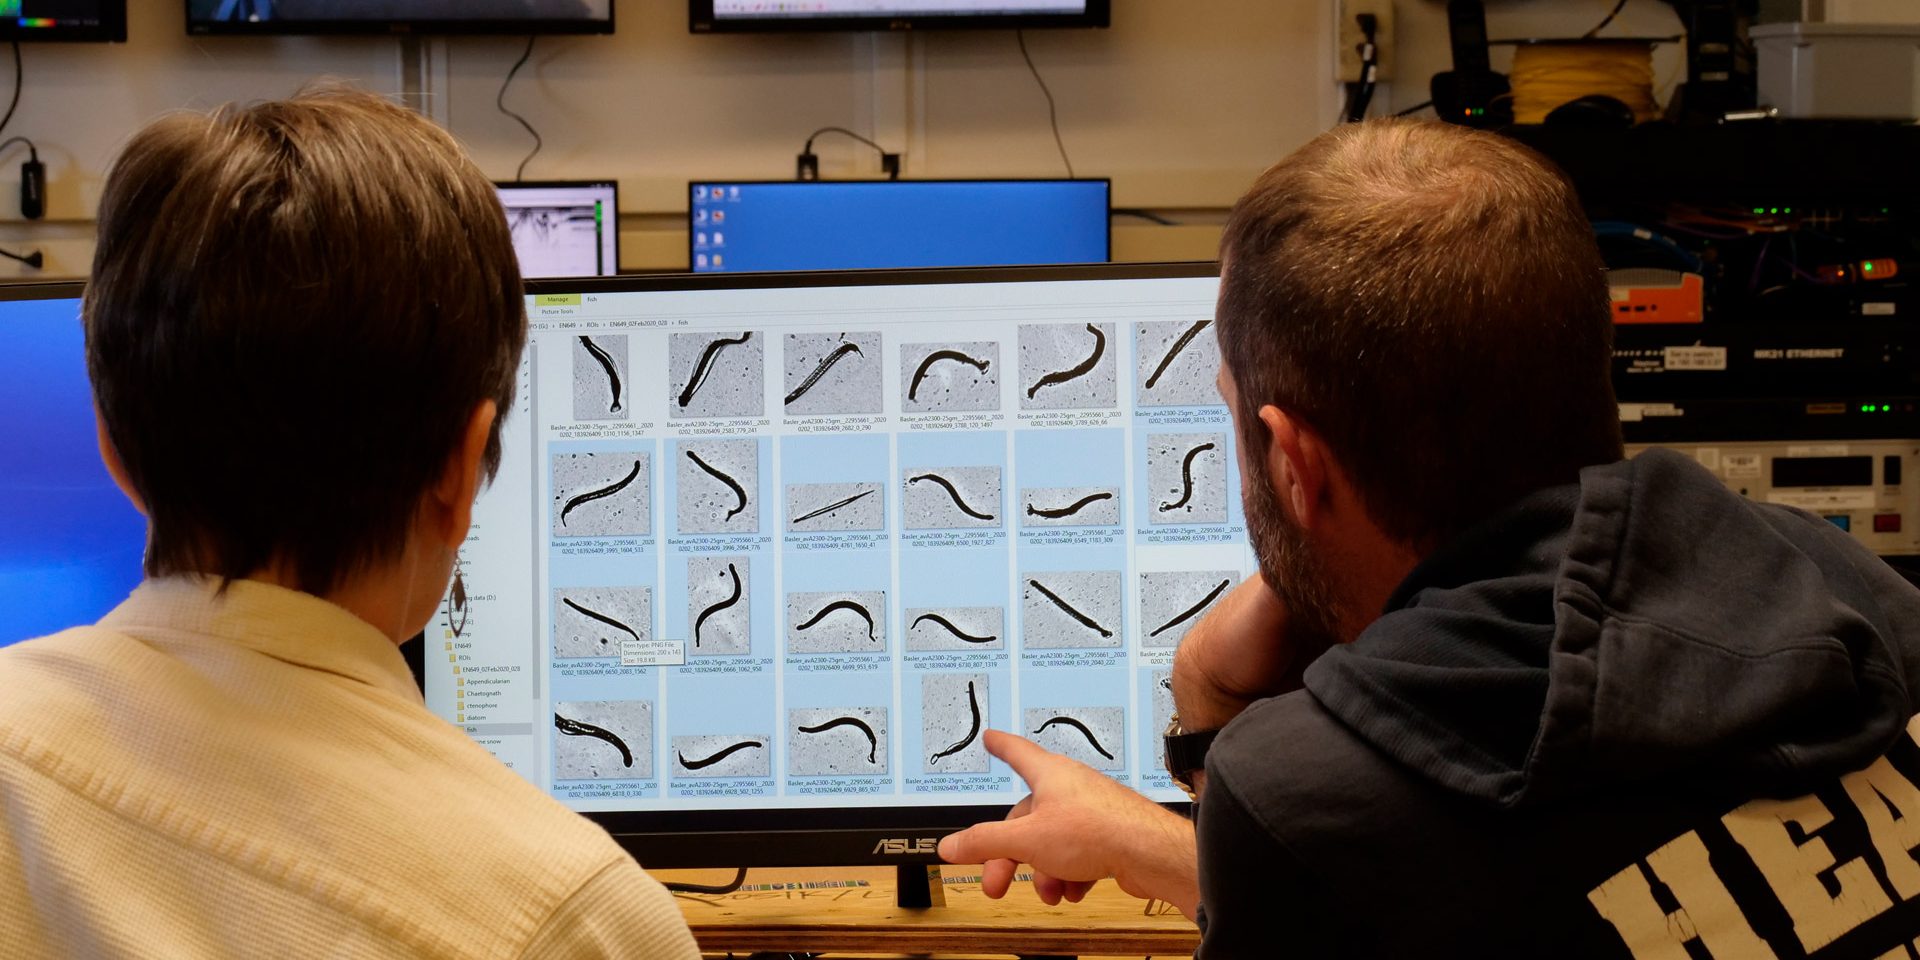 two scientists look at a computer screen with what appears to be a repeating image